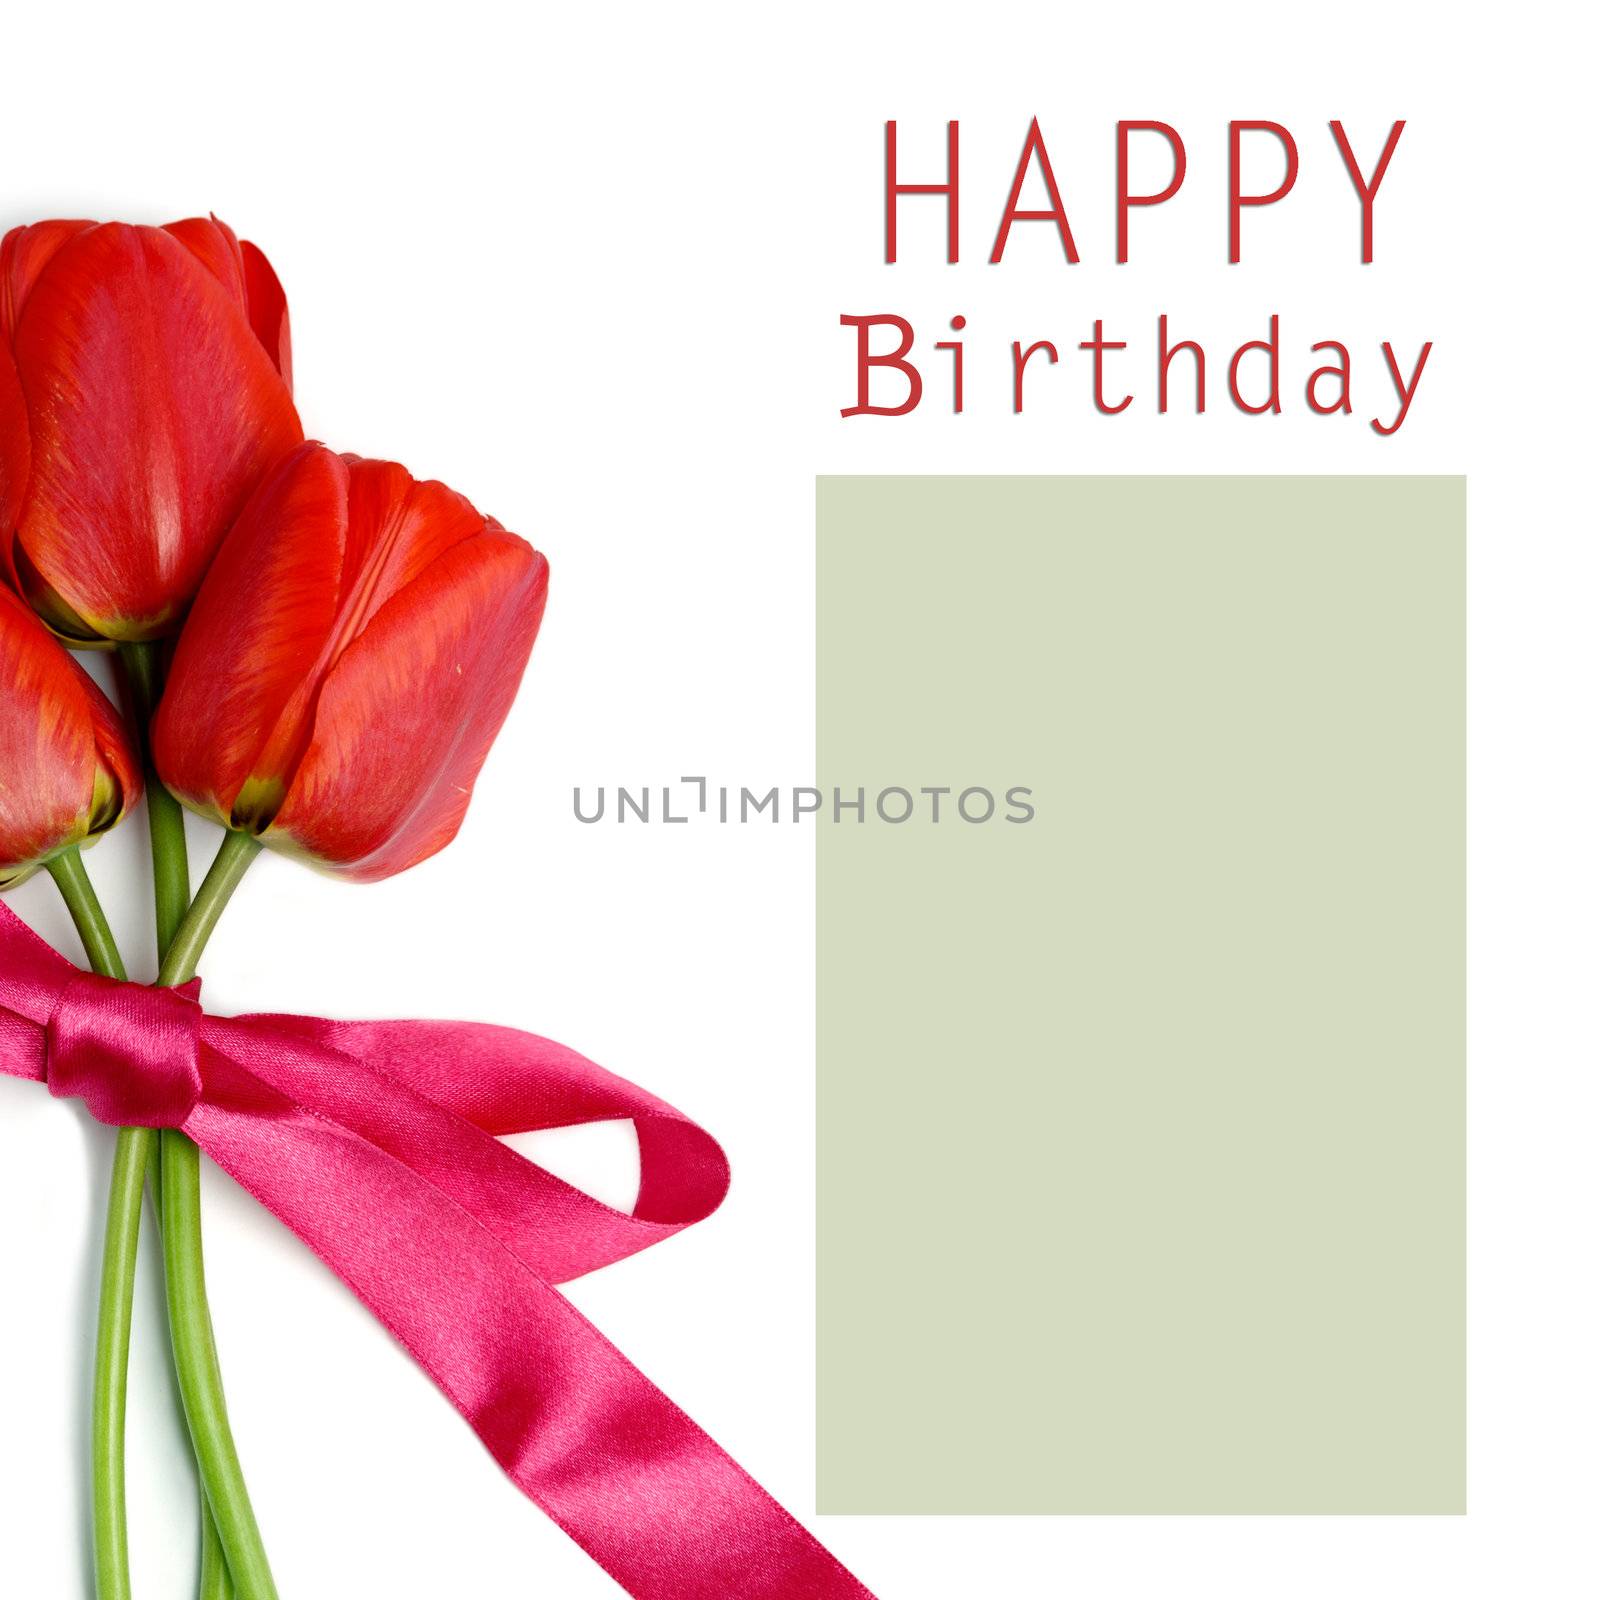 An image of three red tulips on a greeting card